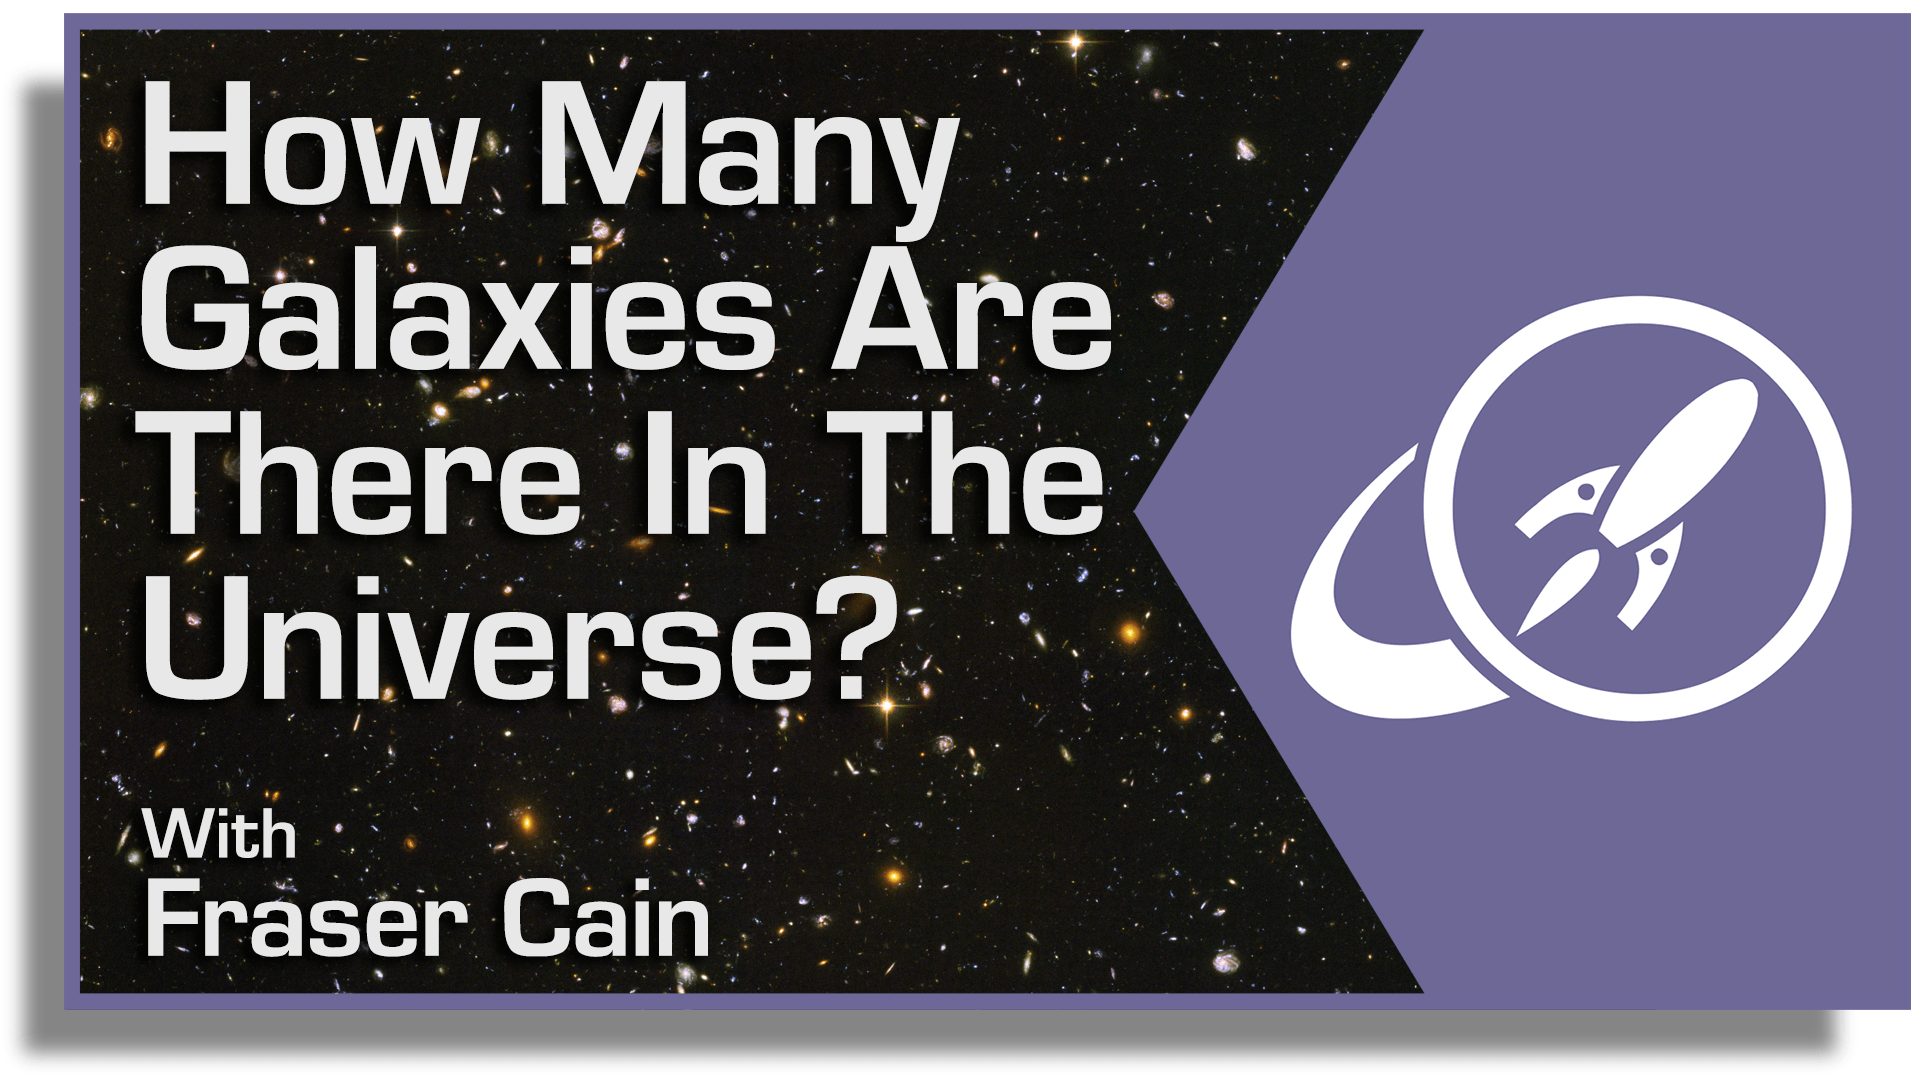 How Many Galaxies Are There in the Universe?